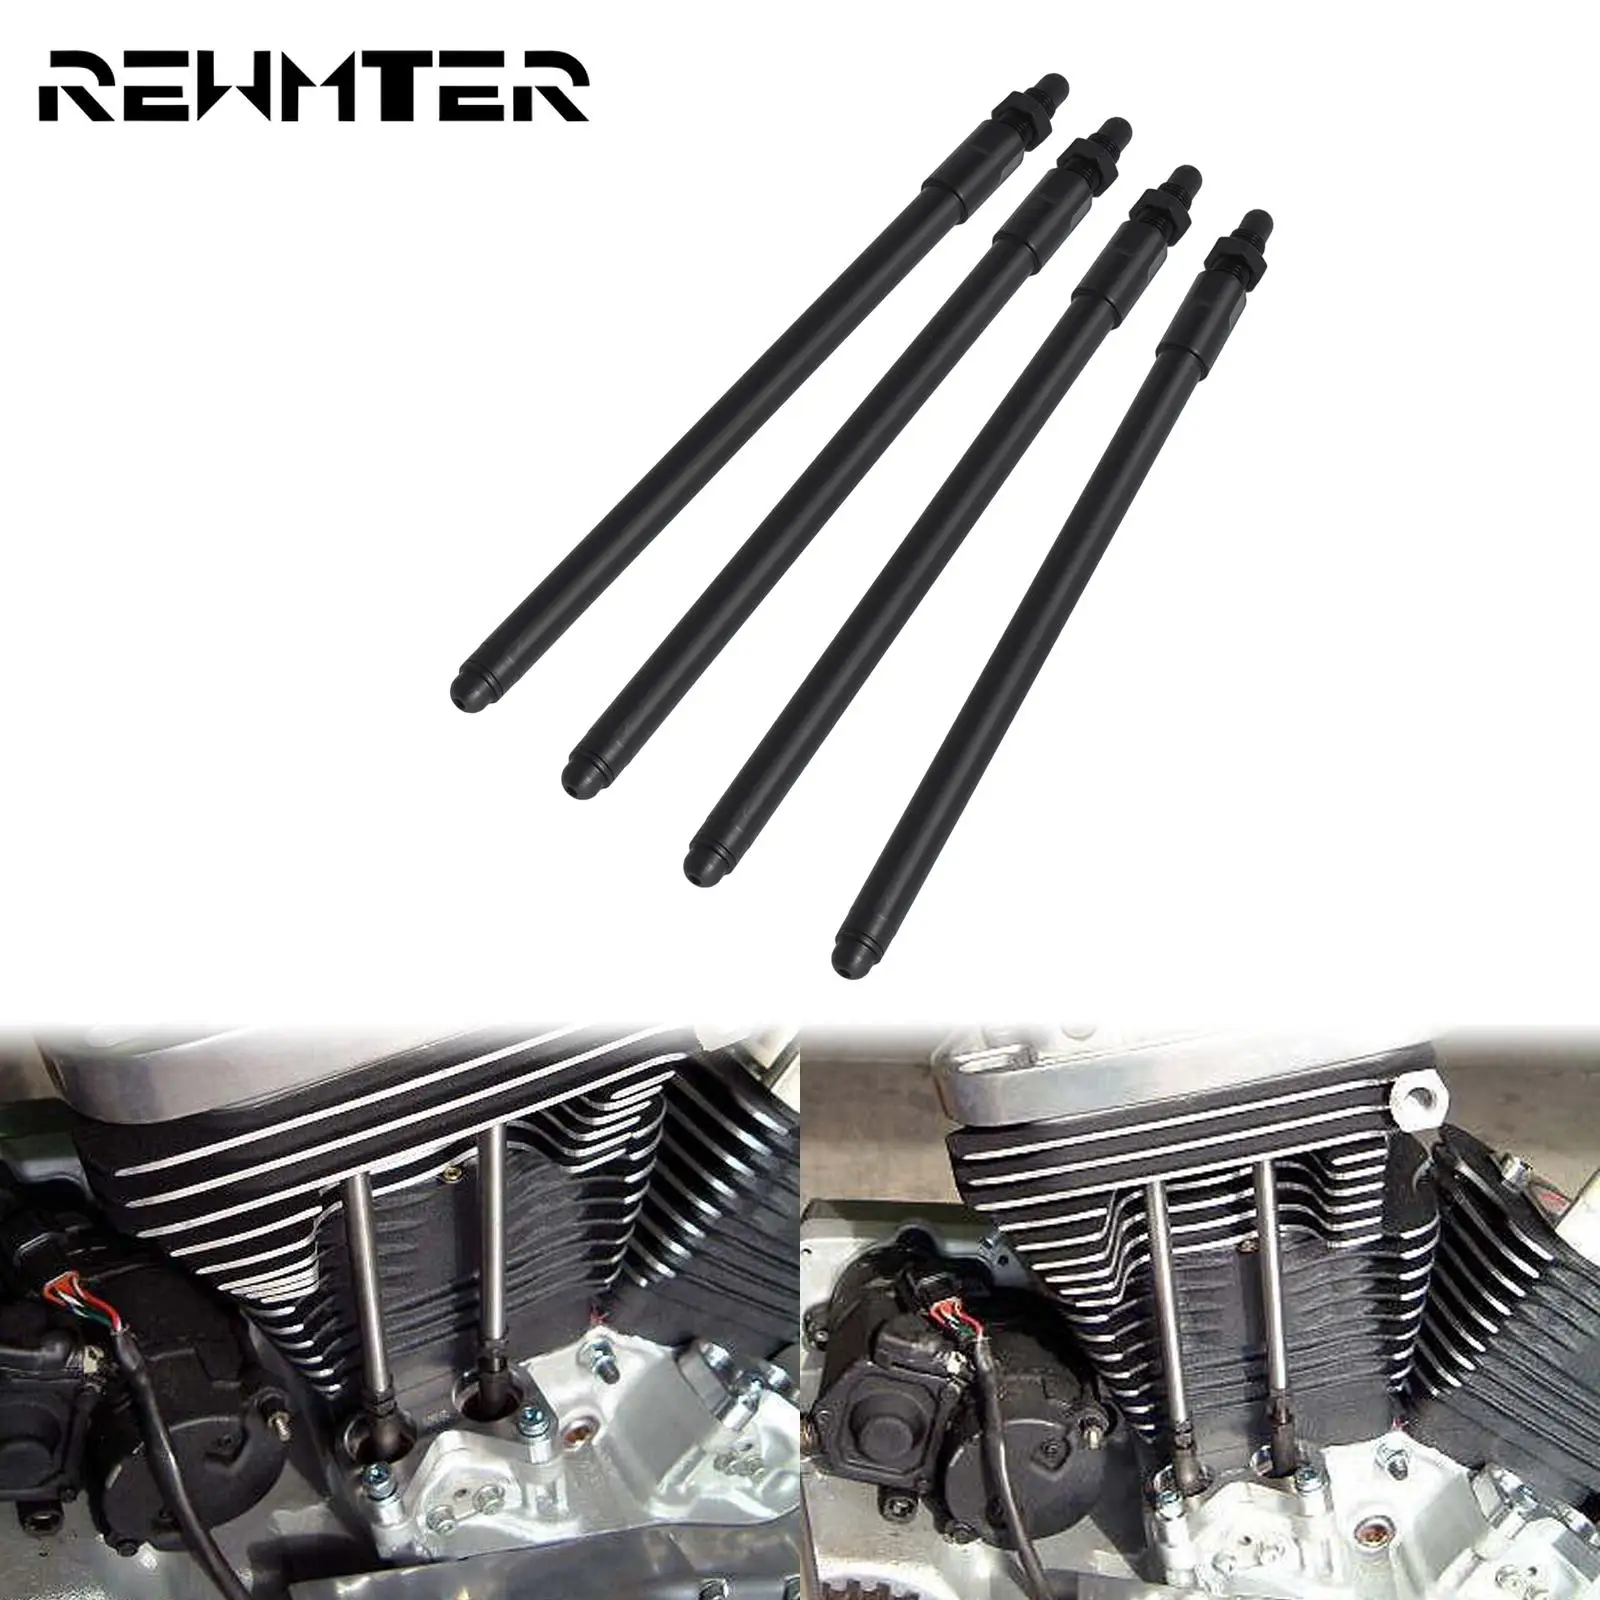 

4PCS Motorcycle Black Adjustable Pushrods For Harley Softail Twin Cam Touring Dyna Heritage Road Street Glide Streetbob 99-2017